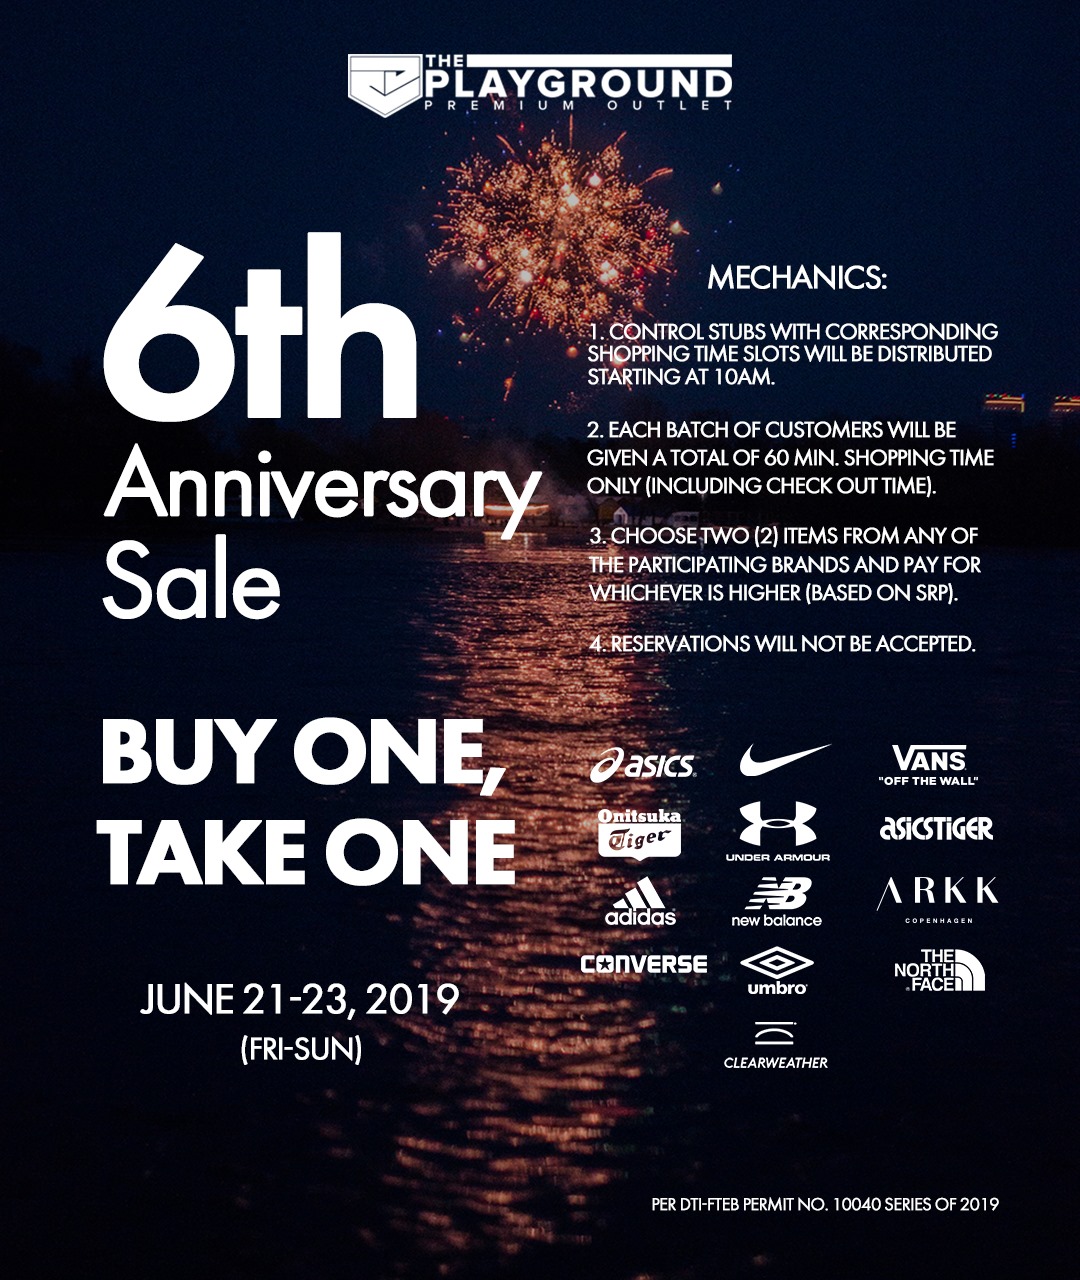 The Playground Premium Outlet 6th Anniversary Sale